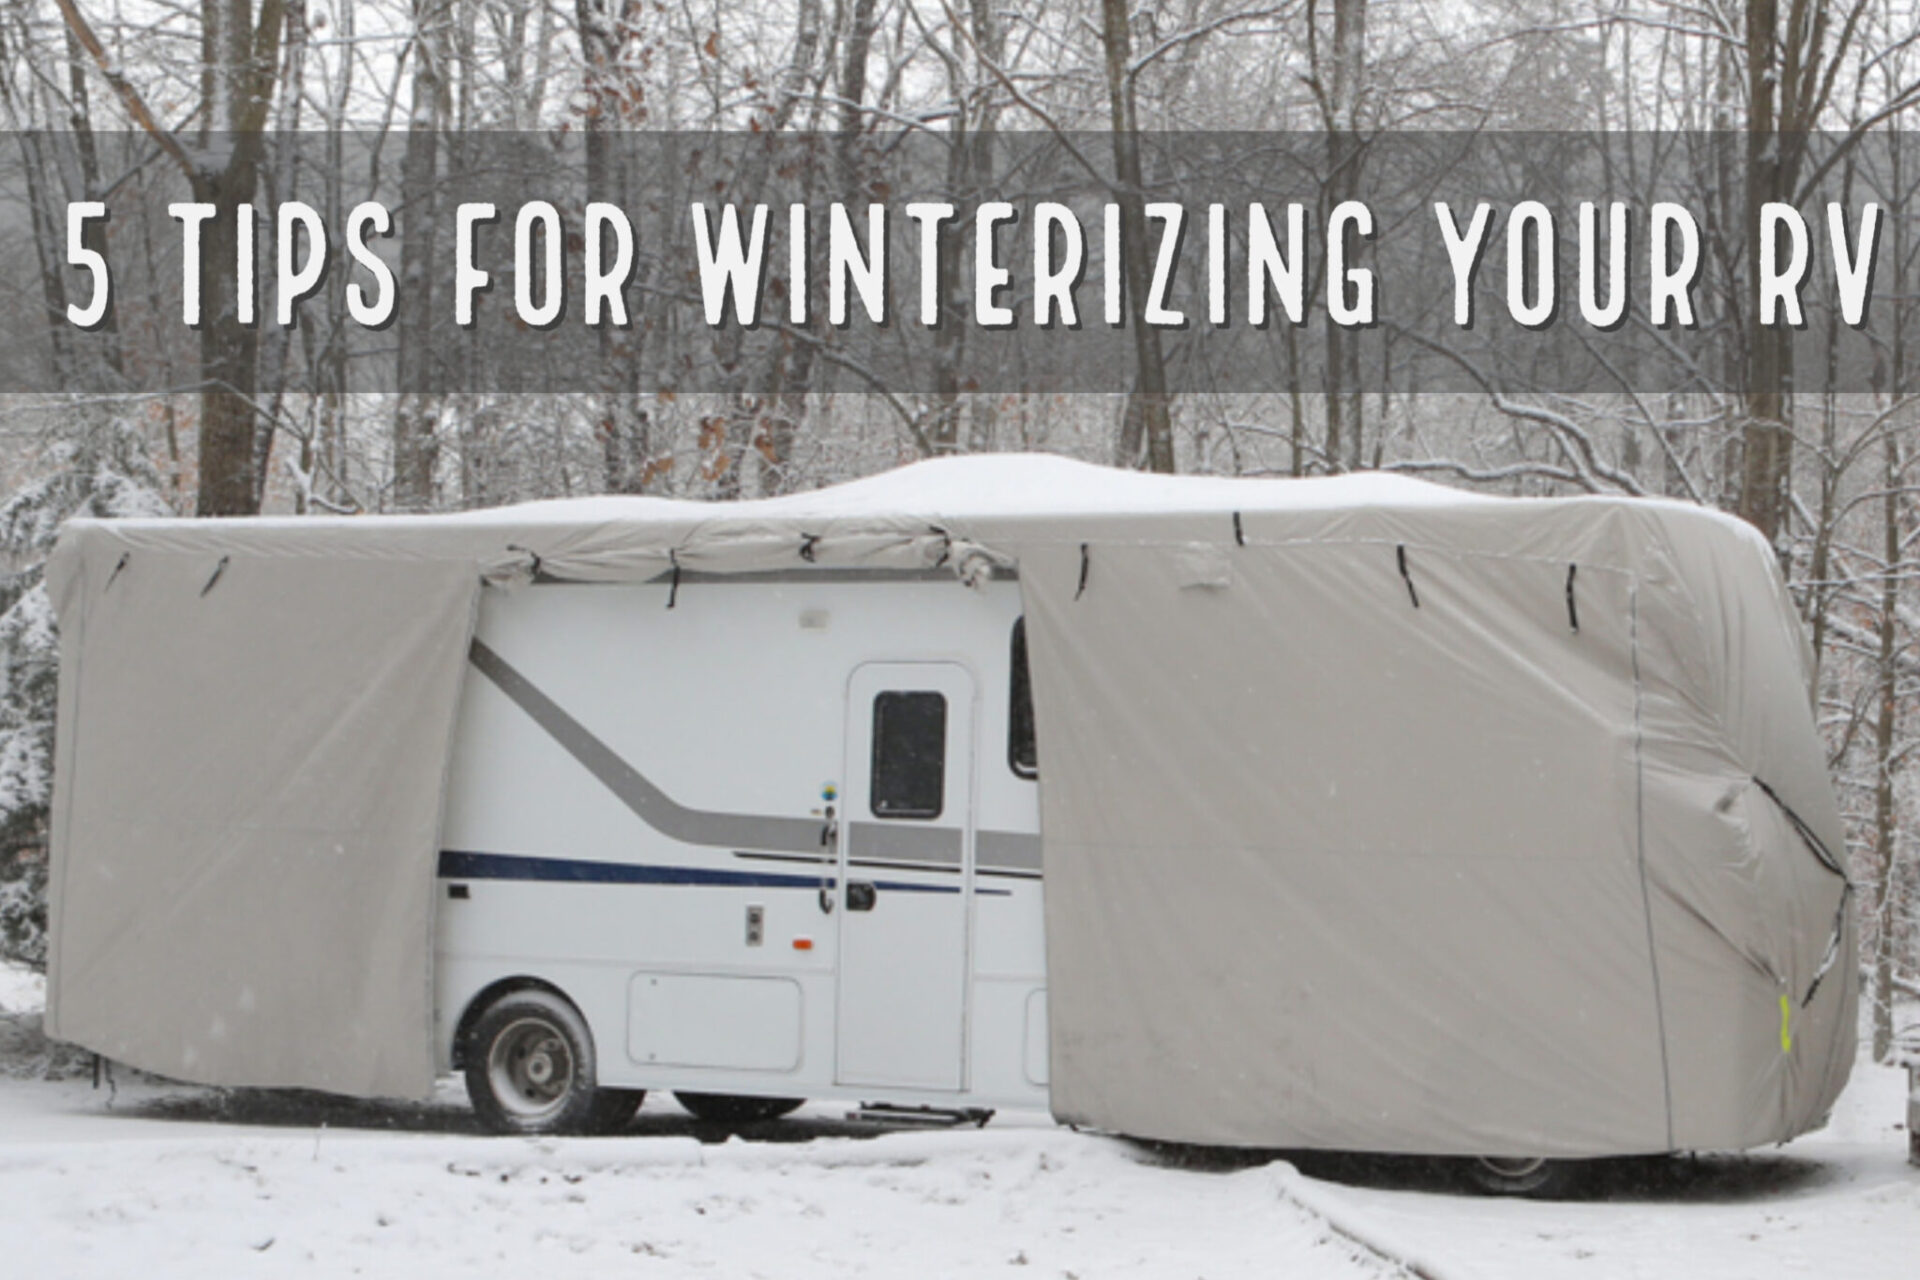 5 Tips for Winterizing Your RV